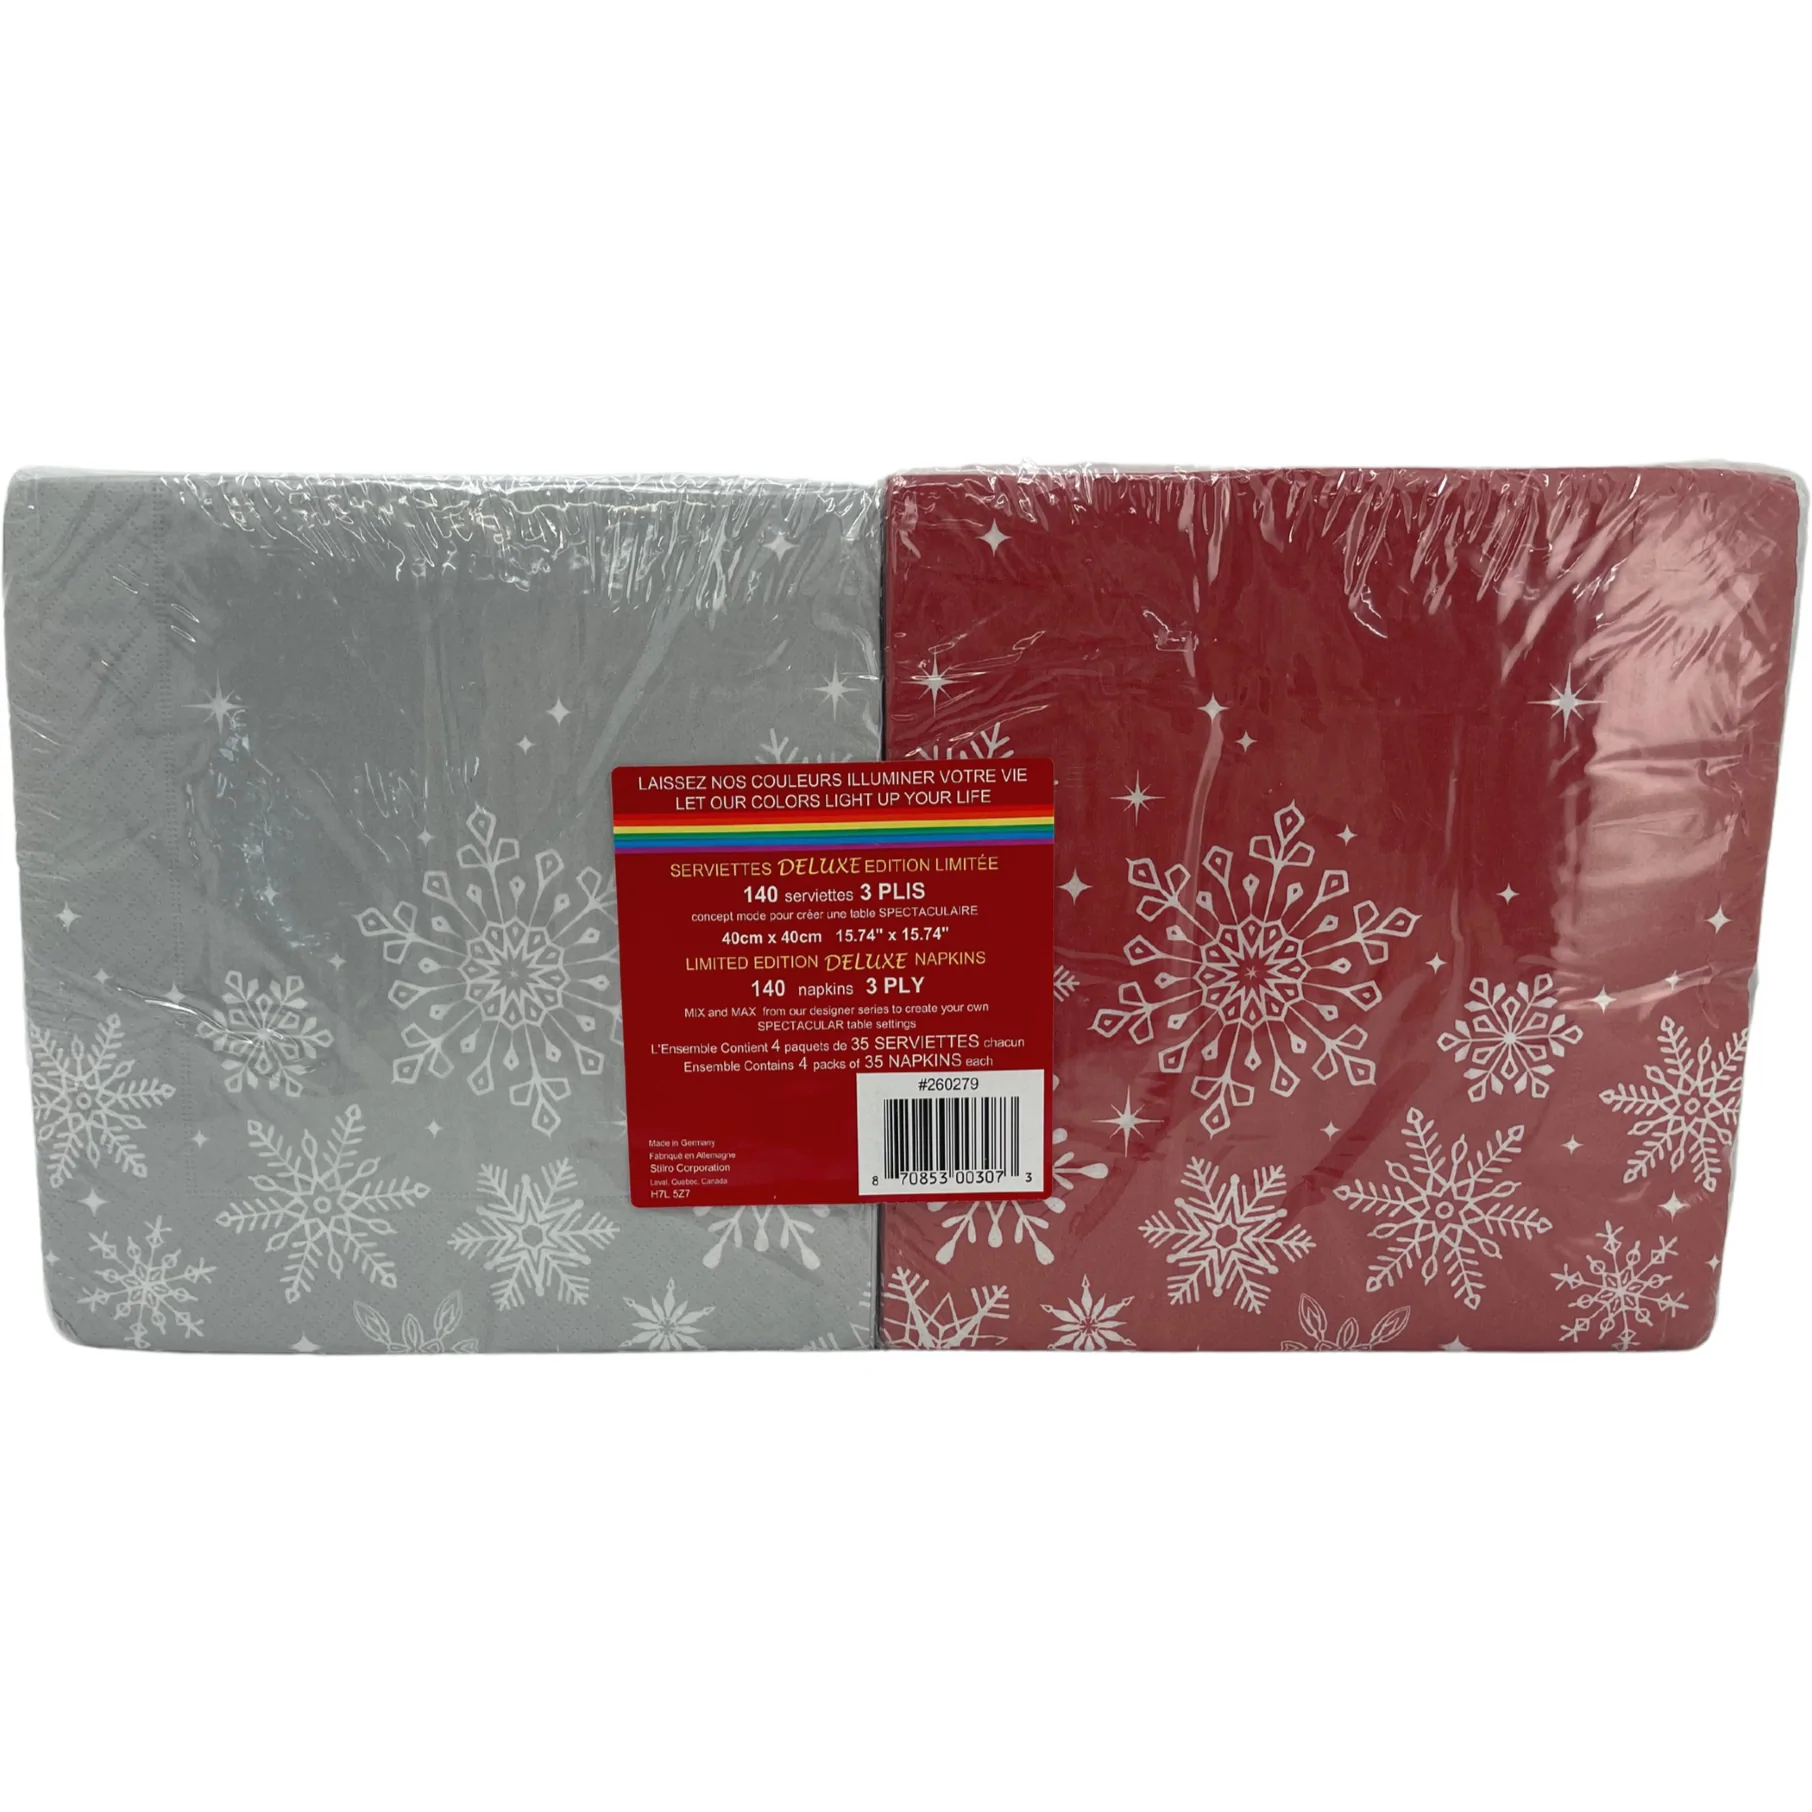 Holiday Napkins / 4 Packs / Green, Red, White & Grey / 140 Napkins / 3 Ply